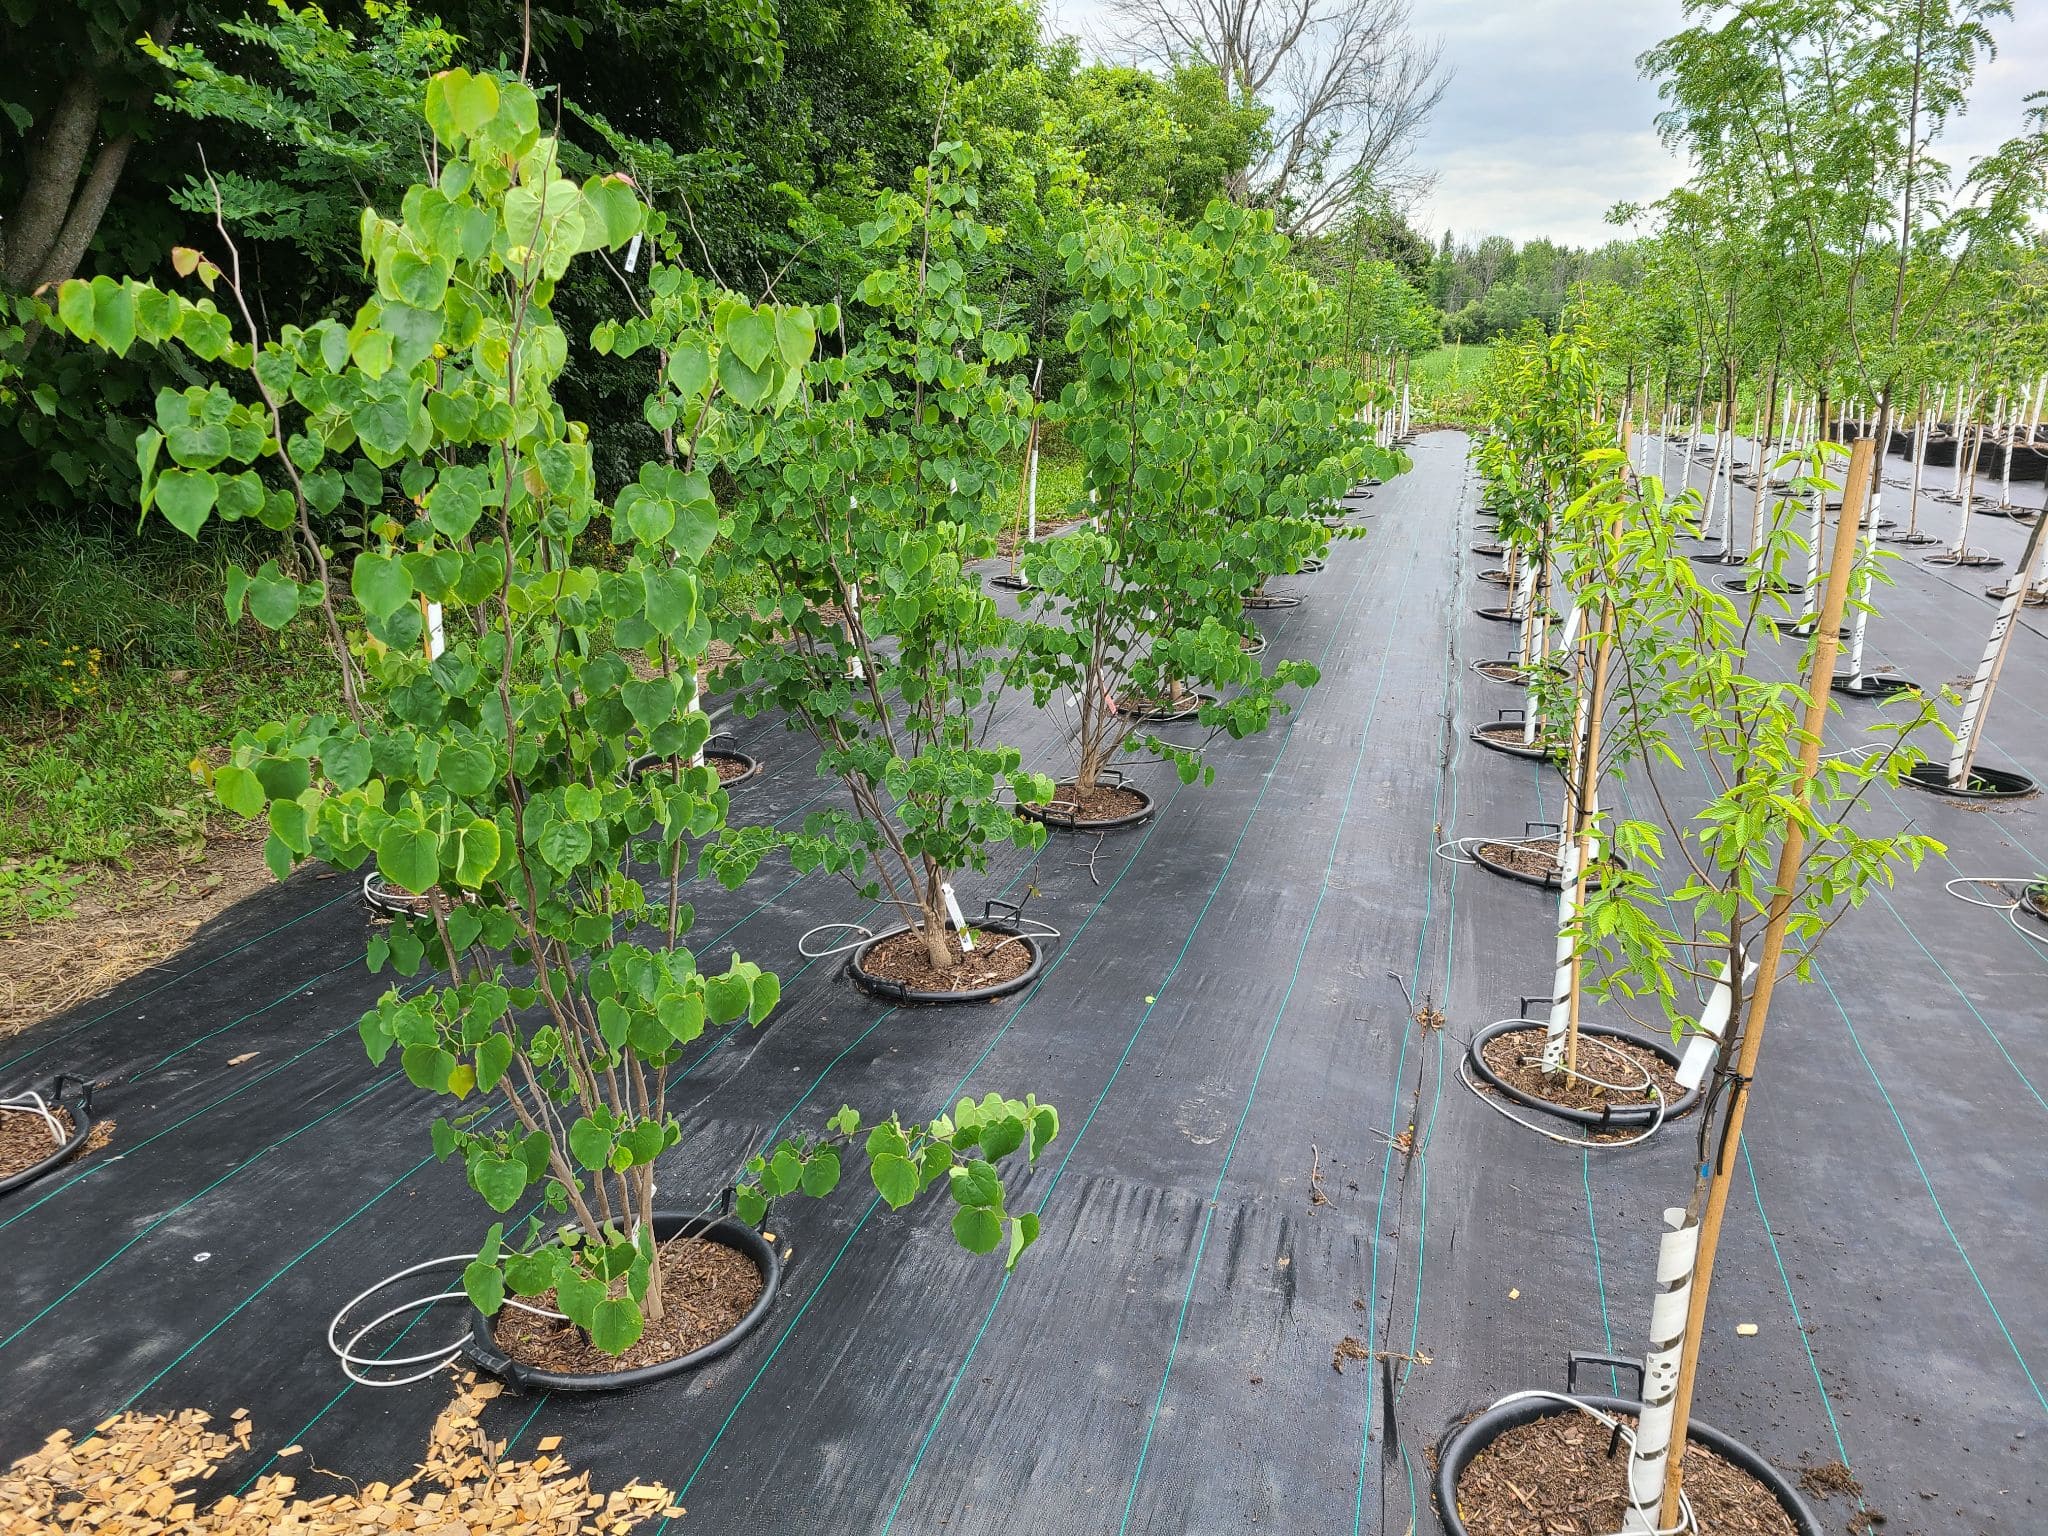 A nursery of trees all growing